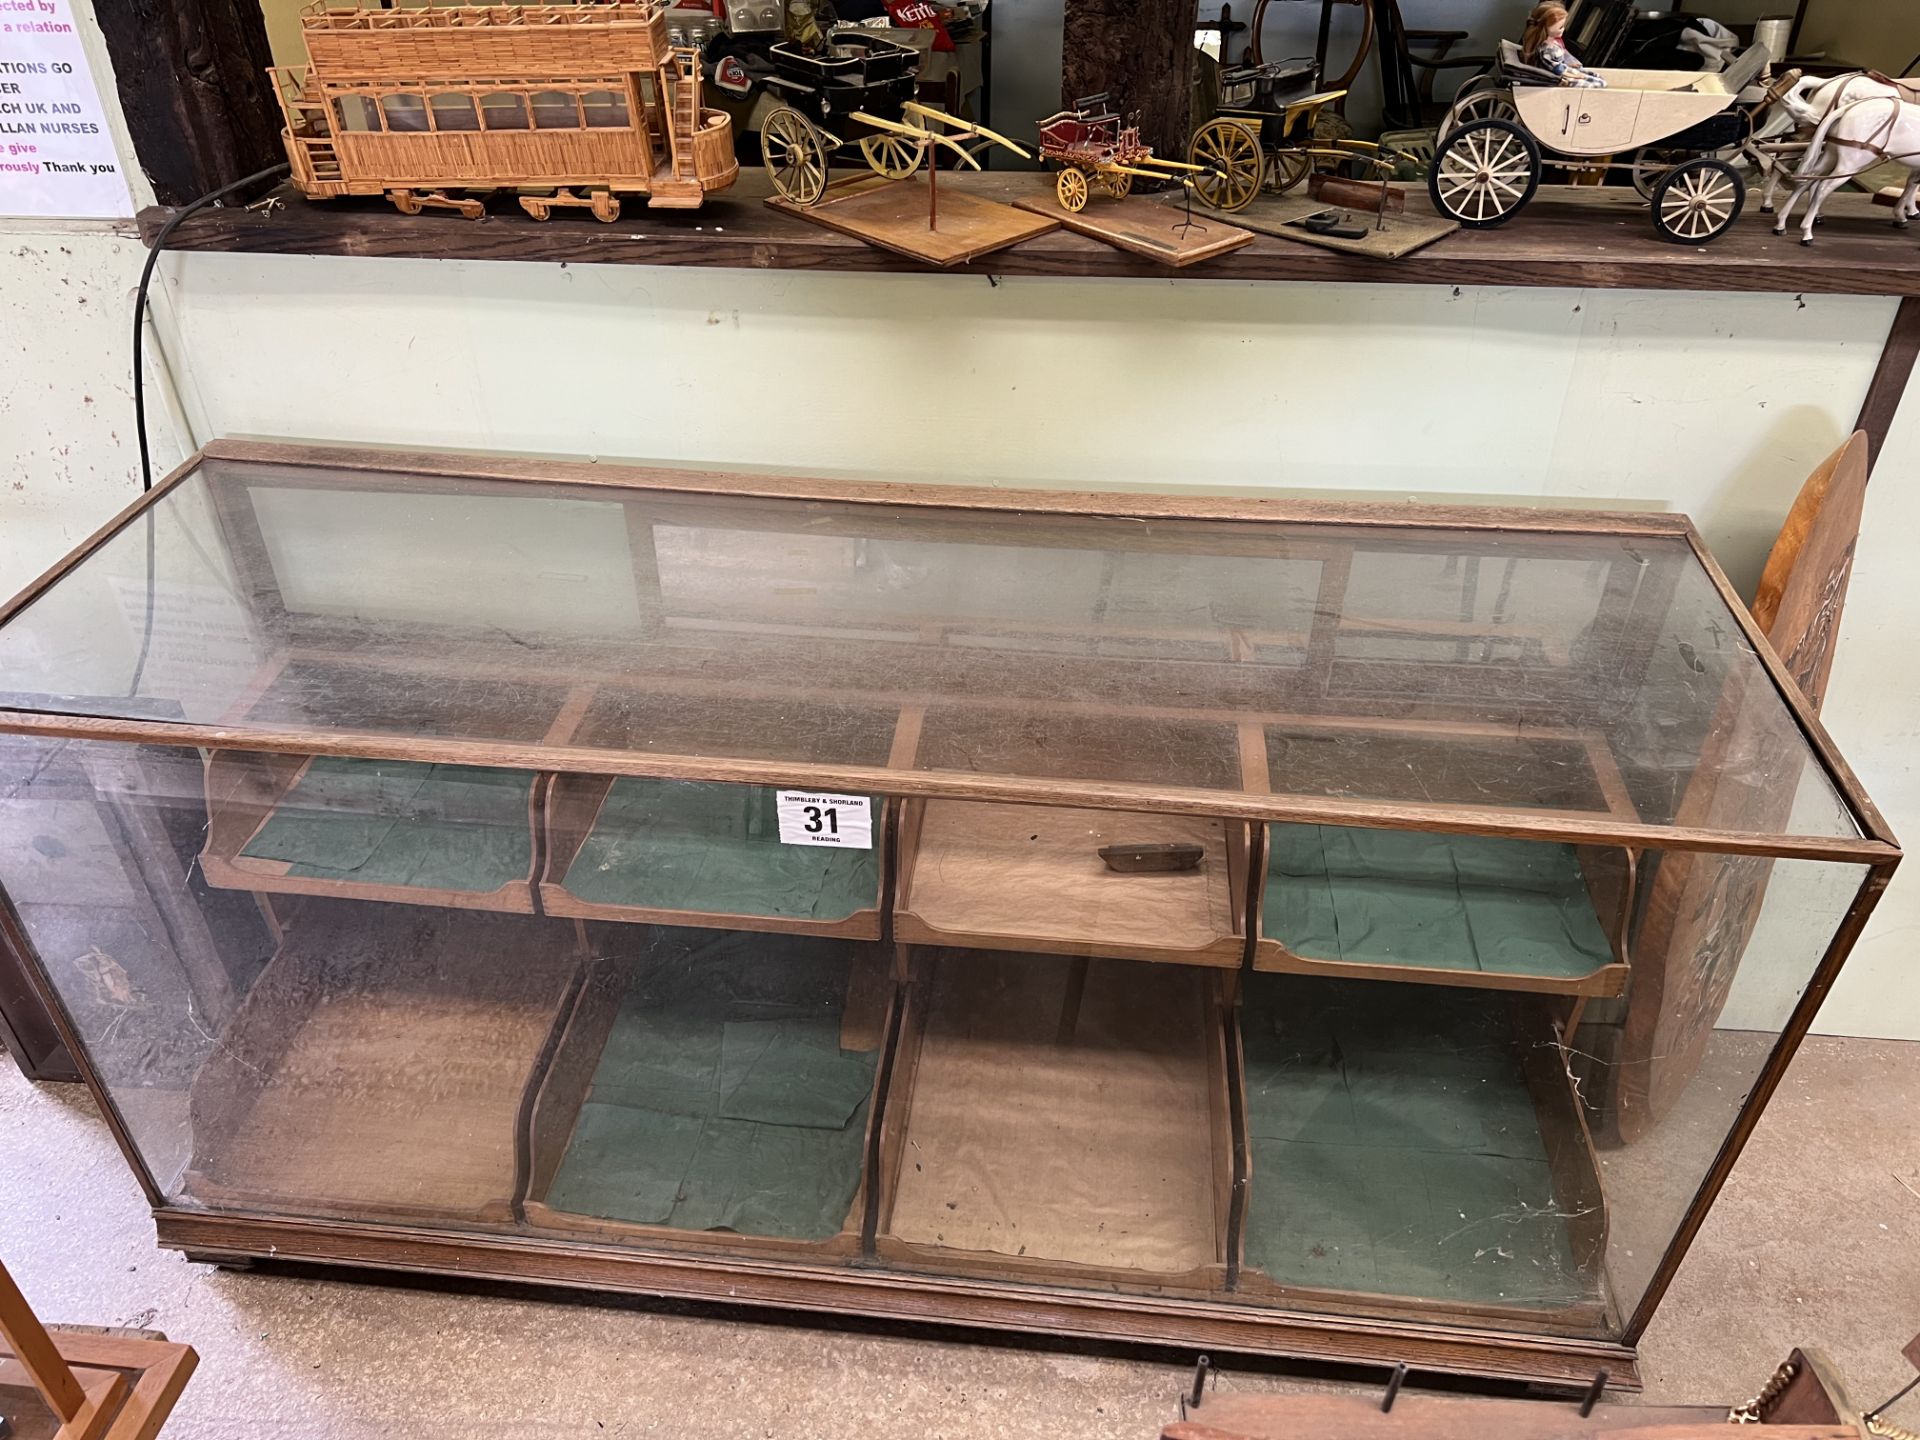 Glass shop display cabinet with drawers. This lot carries VAT.